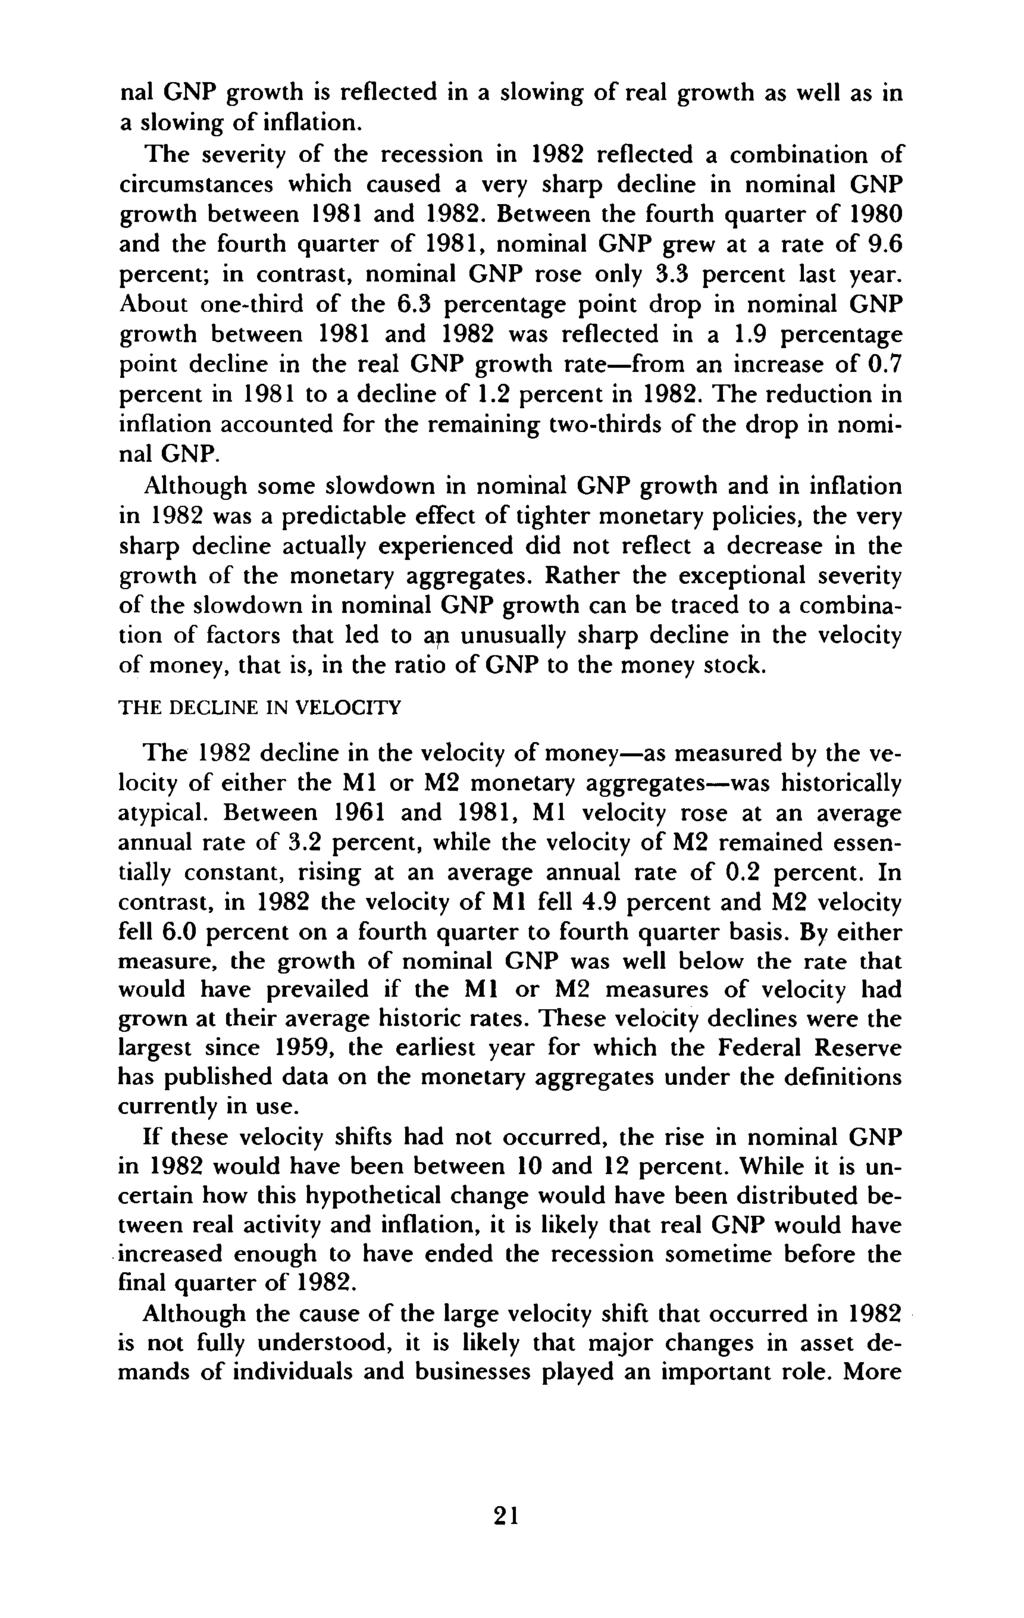 Digitized for FRASER nal GNP growth is reflected in a slowing of real growth as well as in a slowing of inflation.